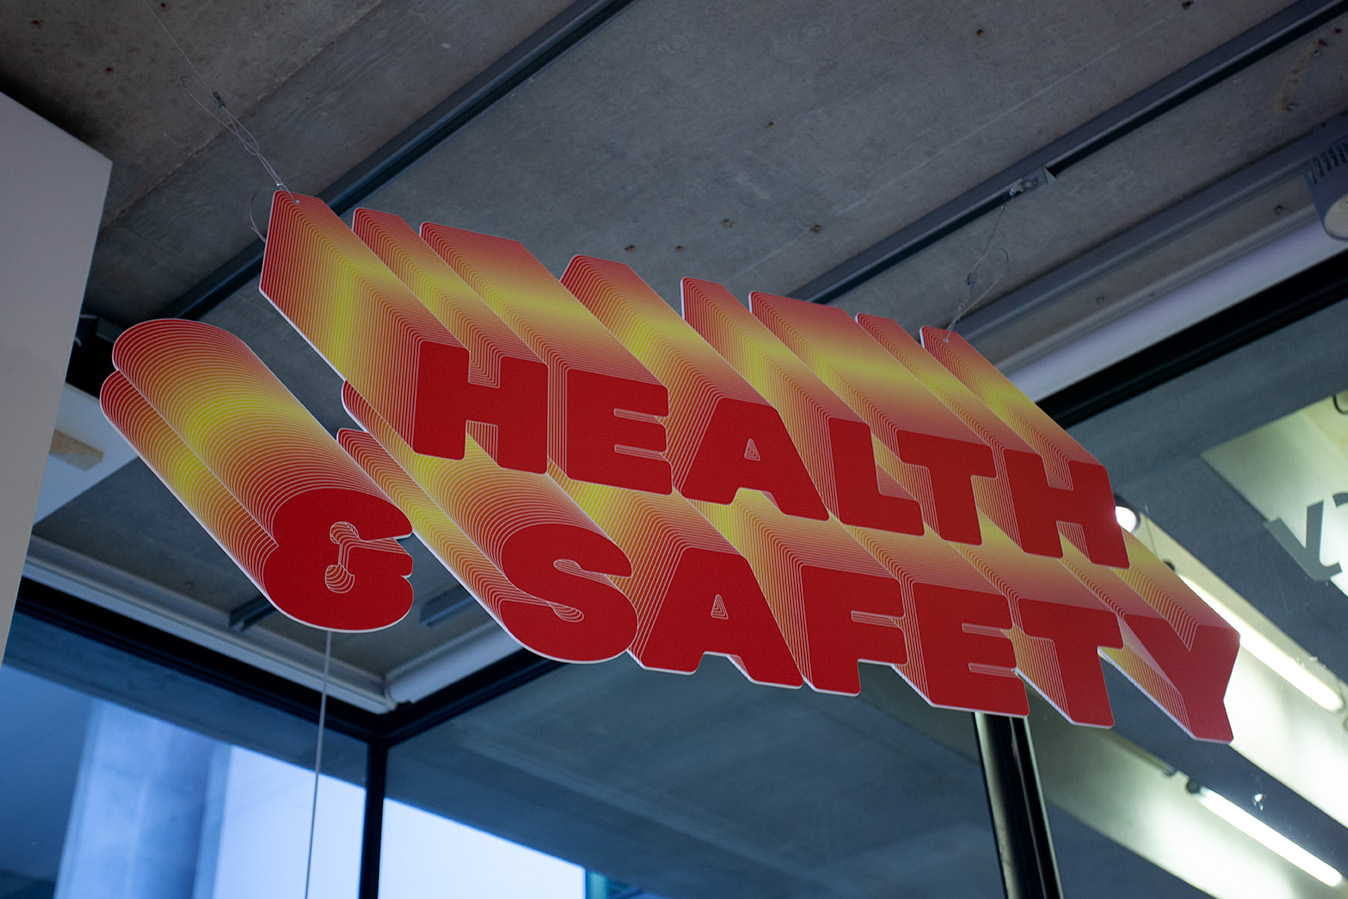 a red and yellow sign reading Health and Safety with a stretched 3D effect, inspired by word art, hanging in the Lethaby Gallery